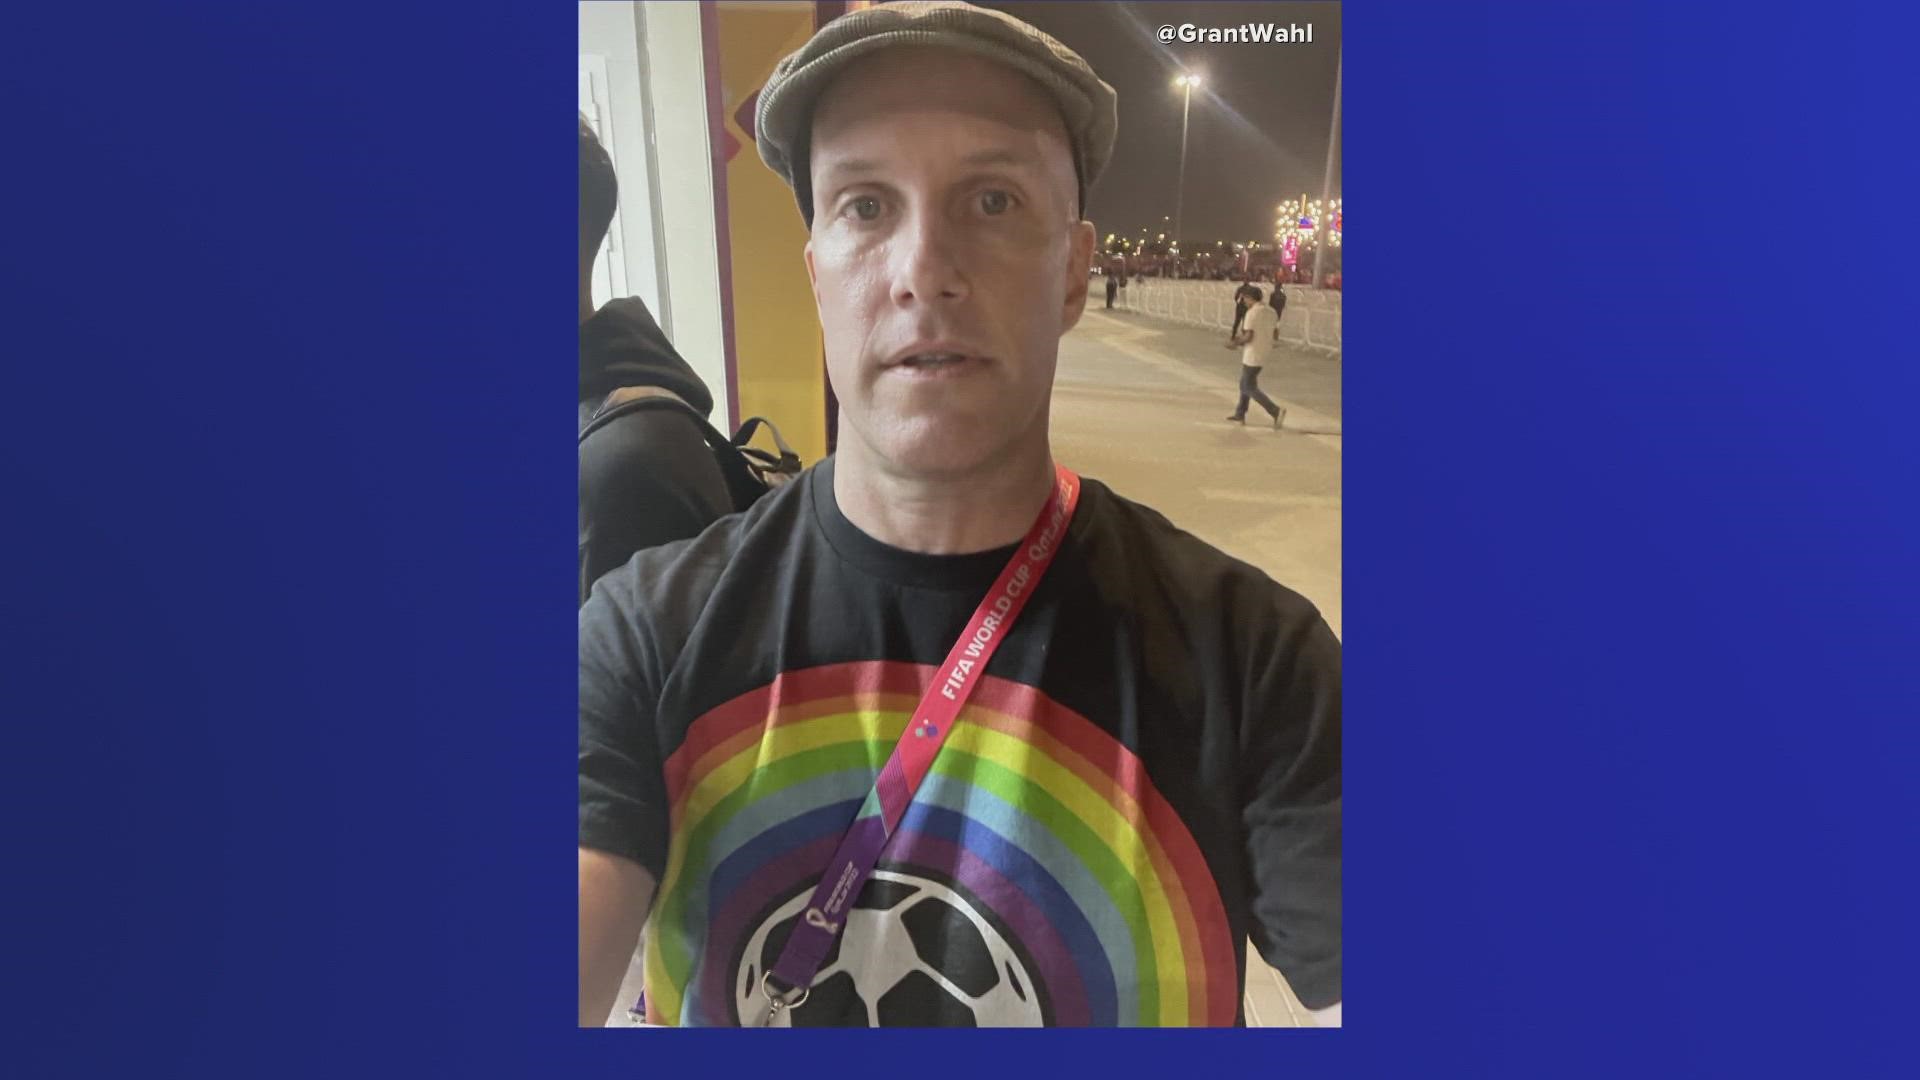 Wahl's death comes weeks after he was detained by Qatari security for wearing a rainbow shirt to the U.S. vs. Wales game in November.